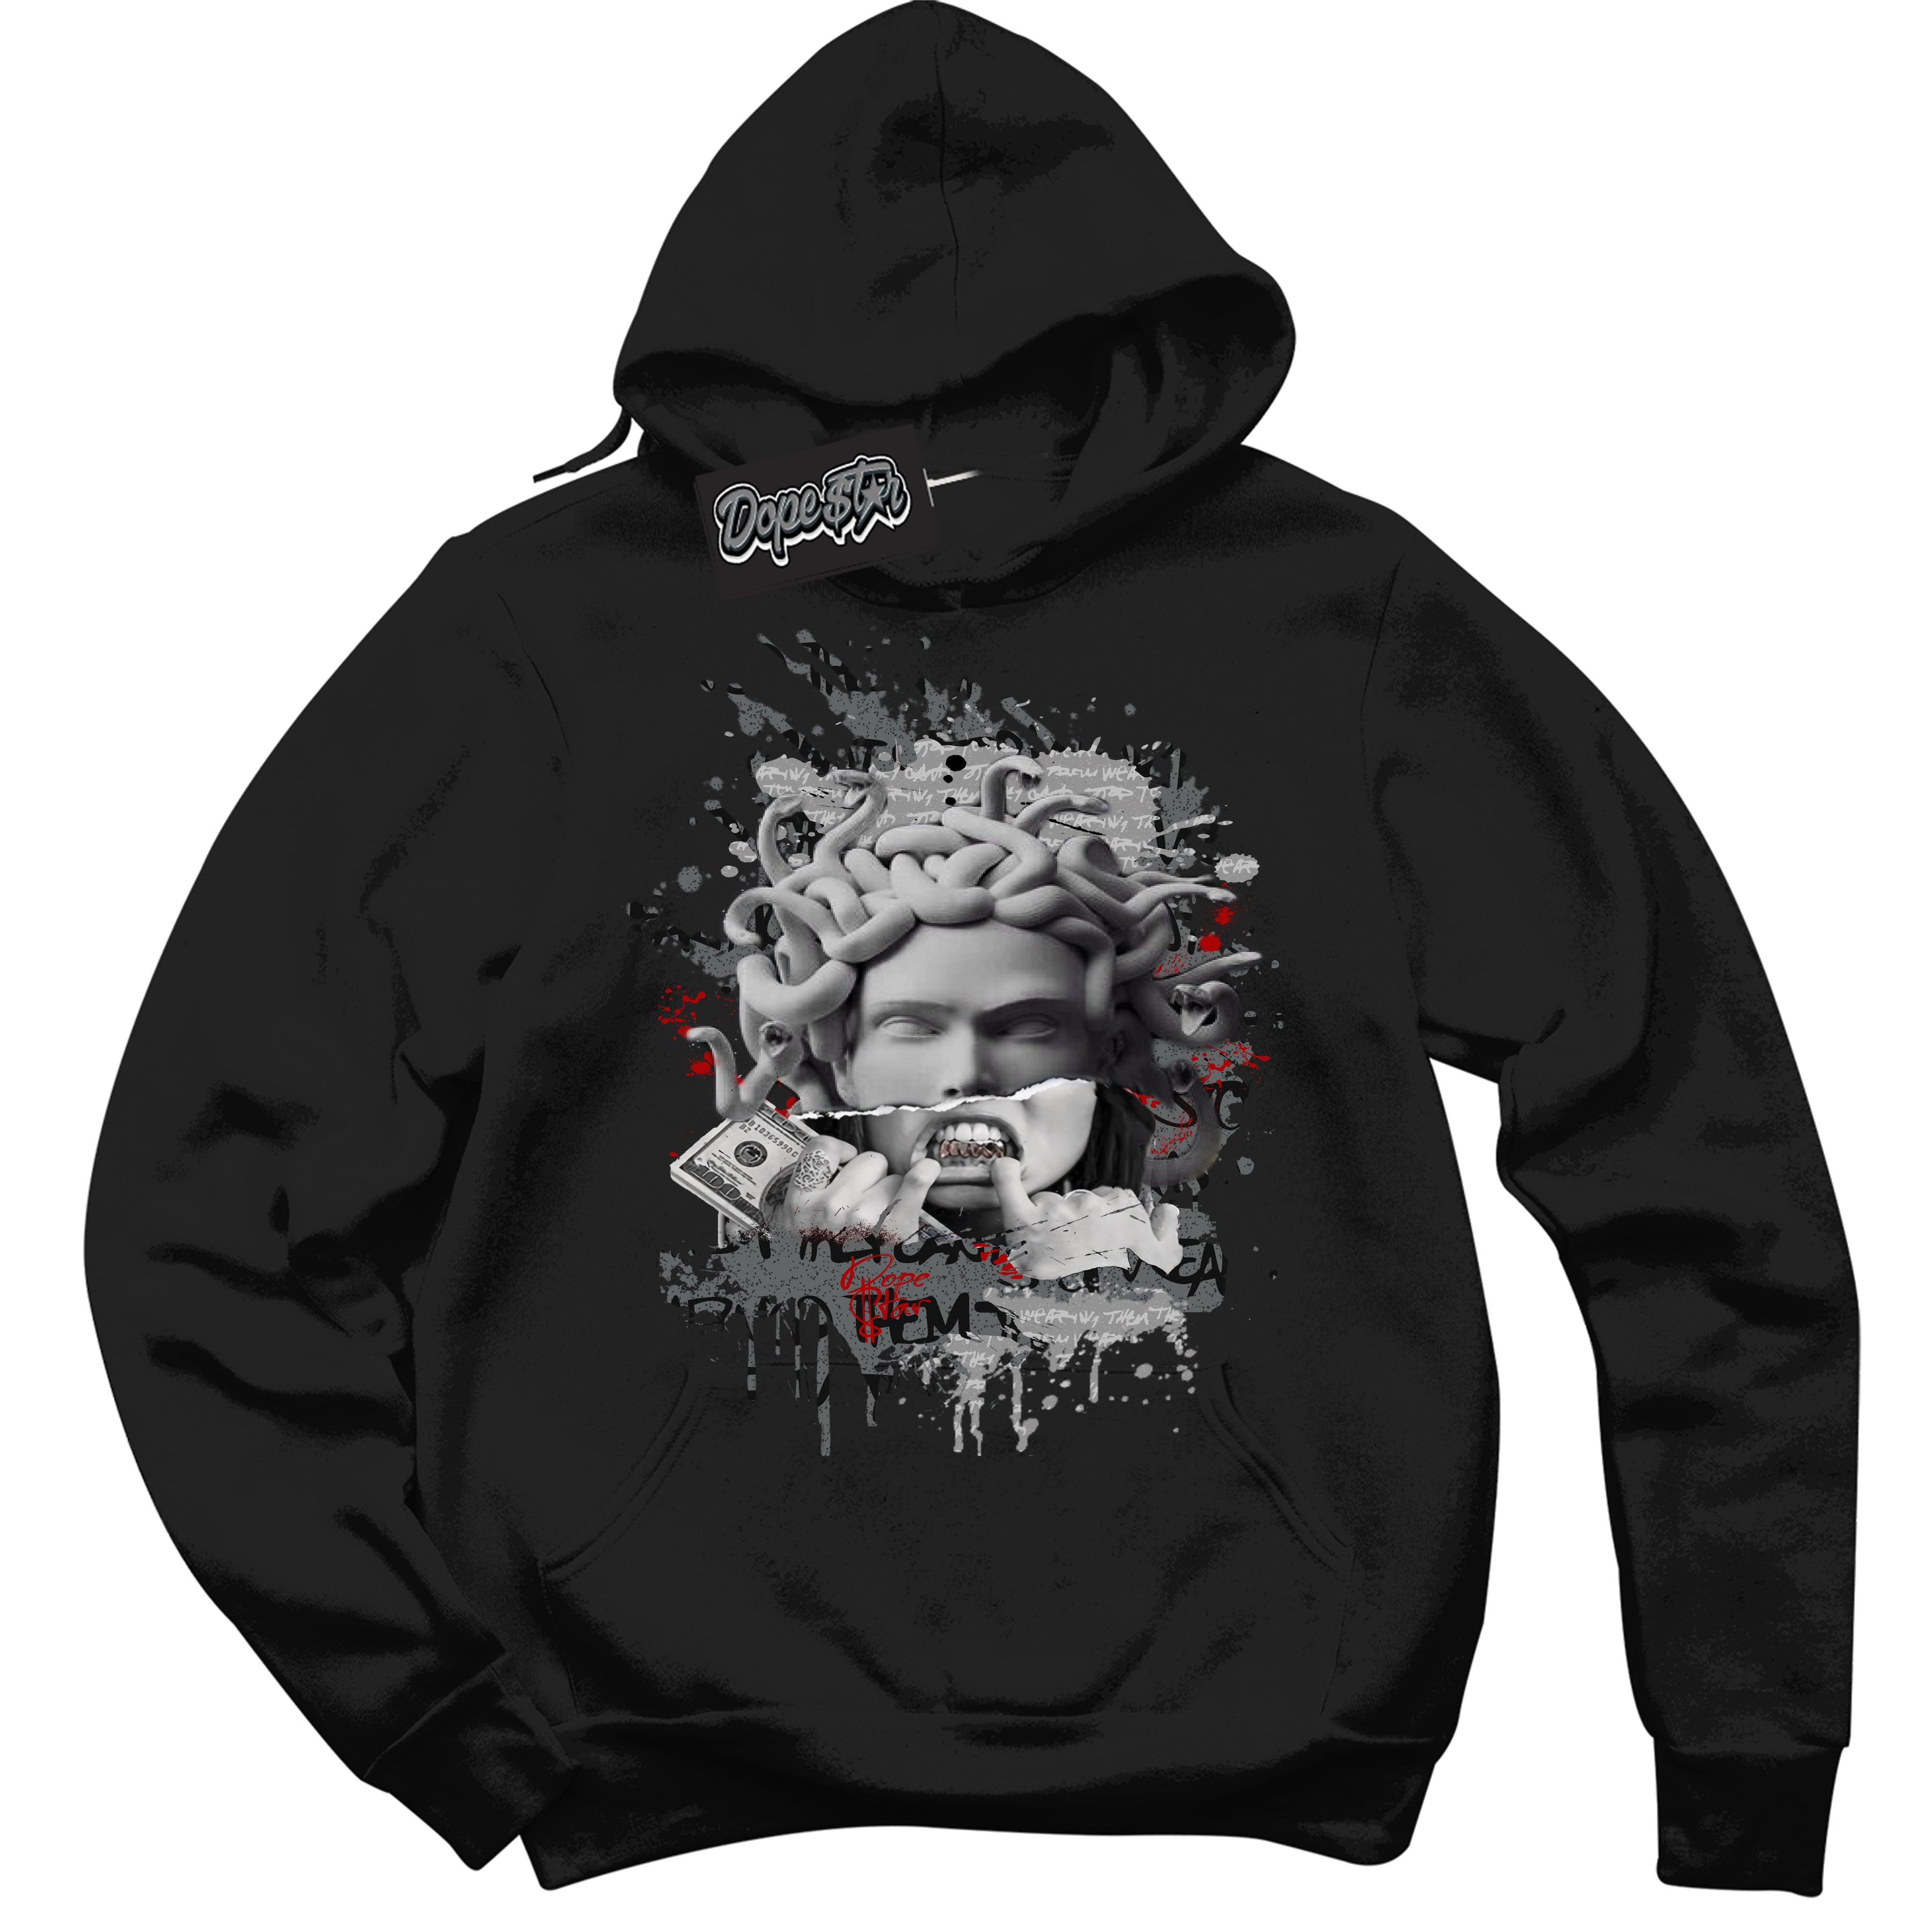 Cool Black Hoodie with “ Medusa ”  design that Perfectly Matches Rebellionaire 1s Sneakers.